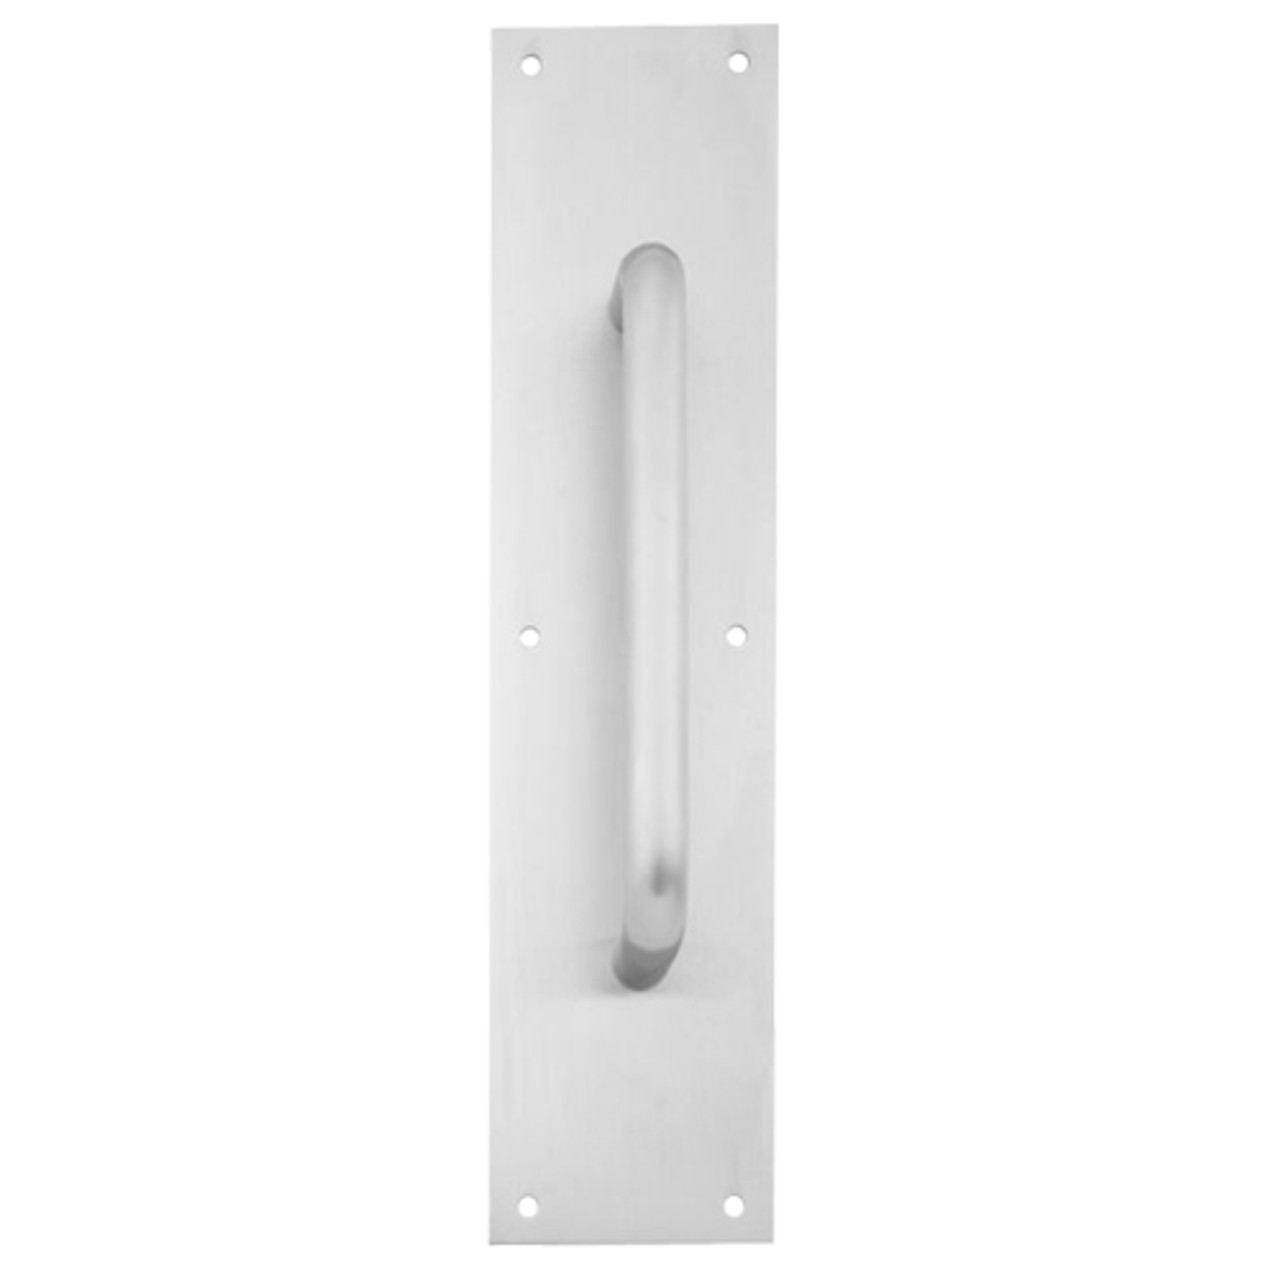 8302-6-US28-4x16 IVES Architectural Door Trim 4x16 Inch Pull Plate in Aluminum